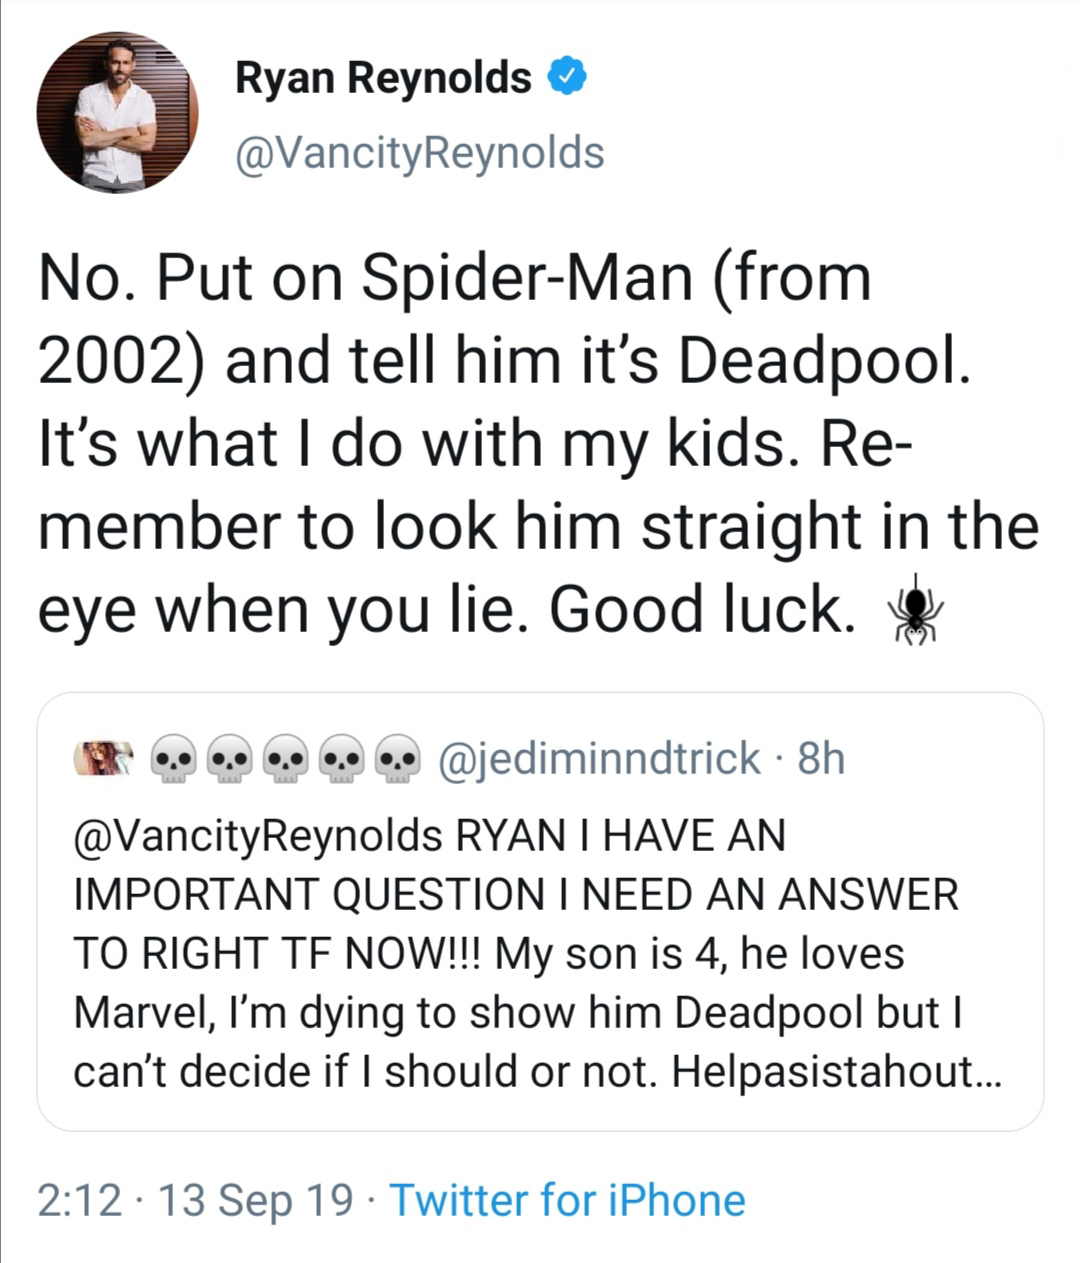 night night bergara - Ryan Reynolds No. Put on SpiderMan from 2002 and tell him it's Deadpool. It's what I do with my kids. Re member to look him straight in the eye when you lie. Good luck. K 8h Reynolds Ryan I Have An Important Question I Need An Answer